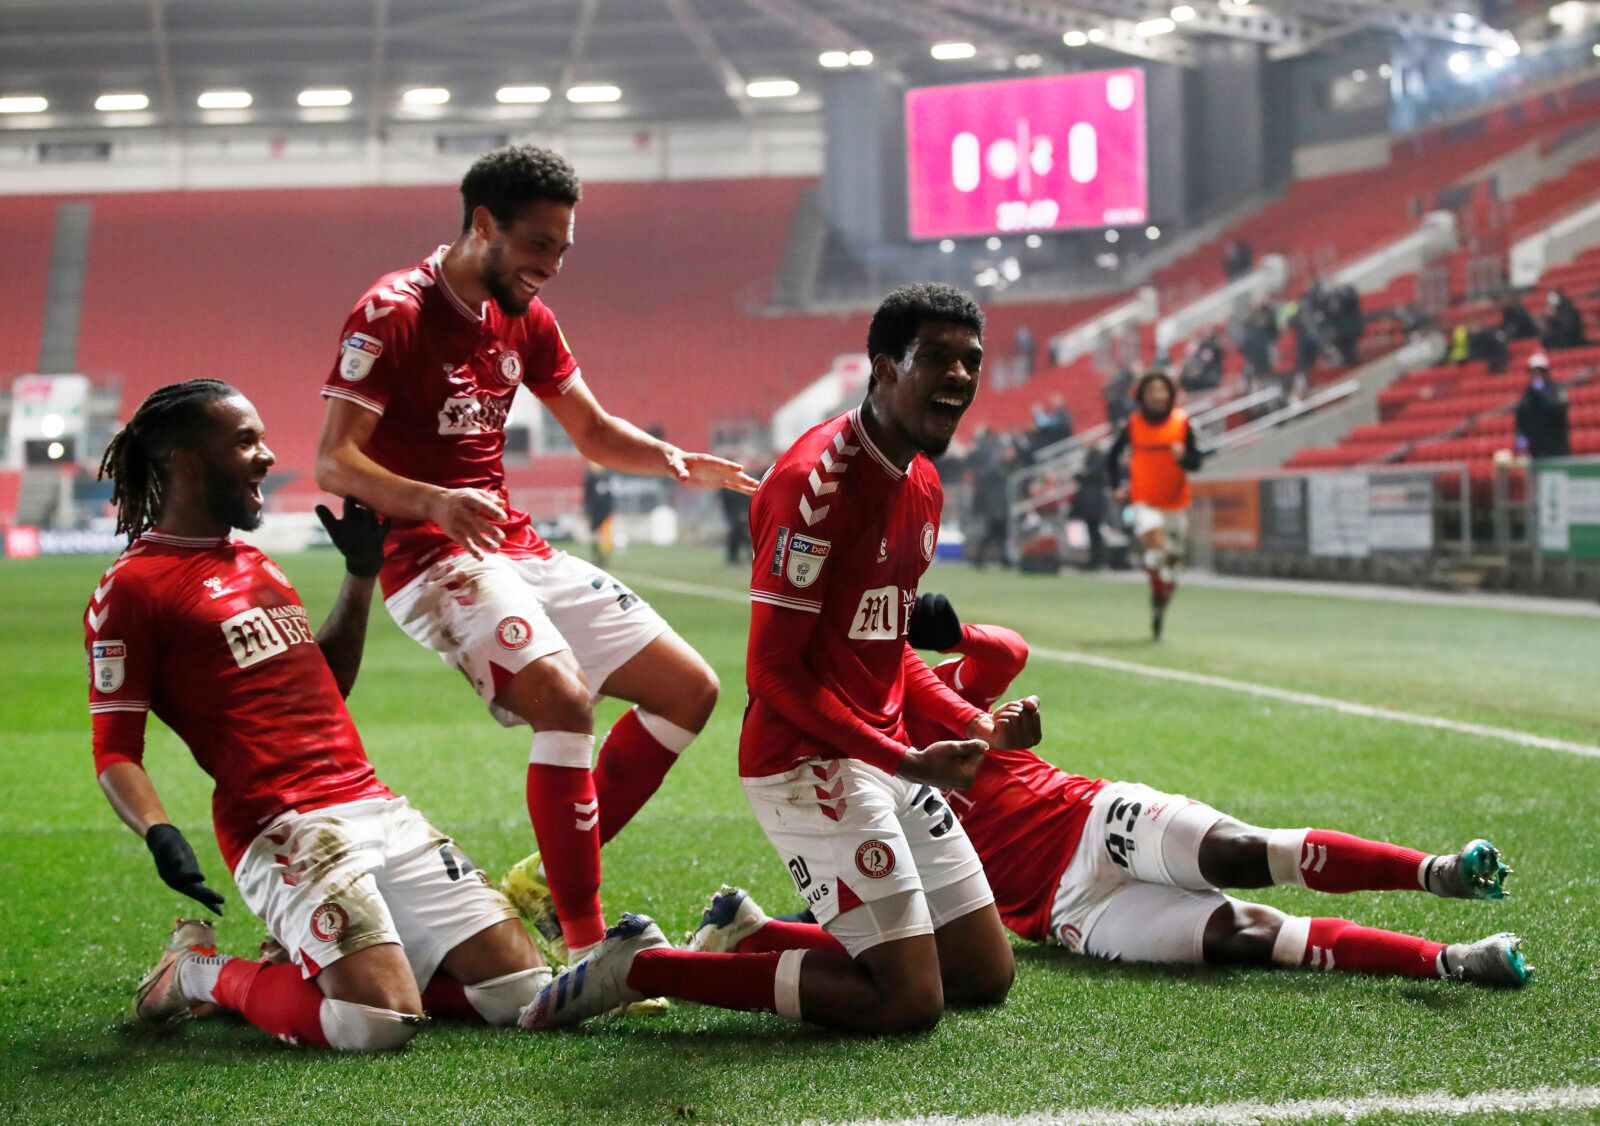 Soccer Football - Championship - Bristol City v AFC Bournemouth - Ashton Gate Stadium, Bristol, Britain - March 3, 2021 Bristol City's Tyreeq Bakinson celebrates scoring their first goal with teammates Action Images/Paul Childs EDITORIAL USE ONLY. No use with unauthorized audio, video, data, fixture lists, club/league logos or 'live' services. Online in-match use limited to 75 images, no video emulation. No use in betting, games or single club /league/player publications.  Please contact your ac